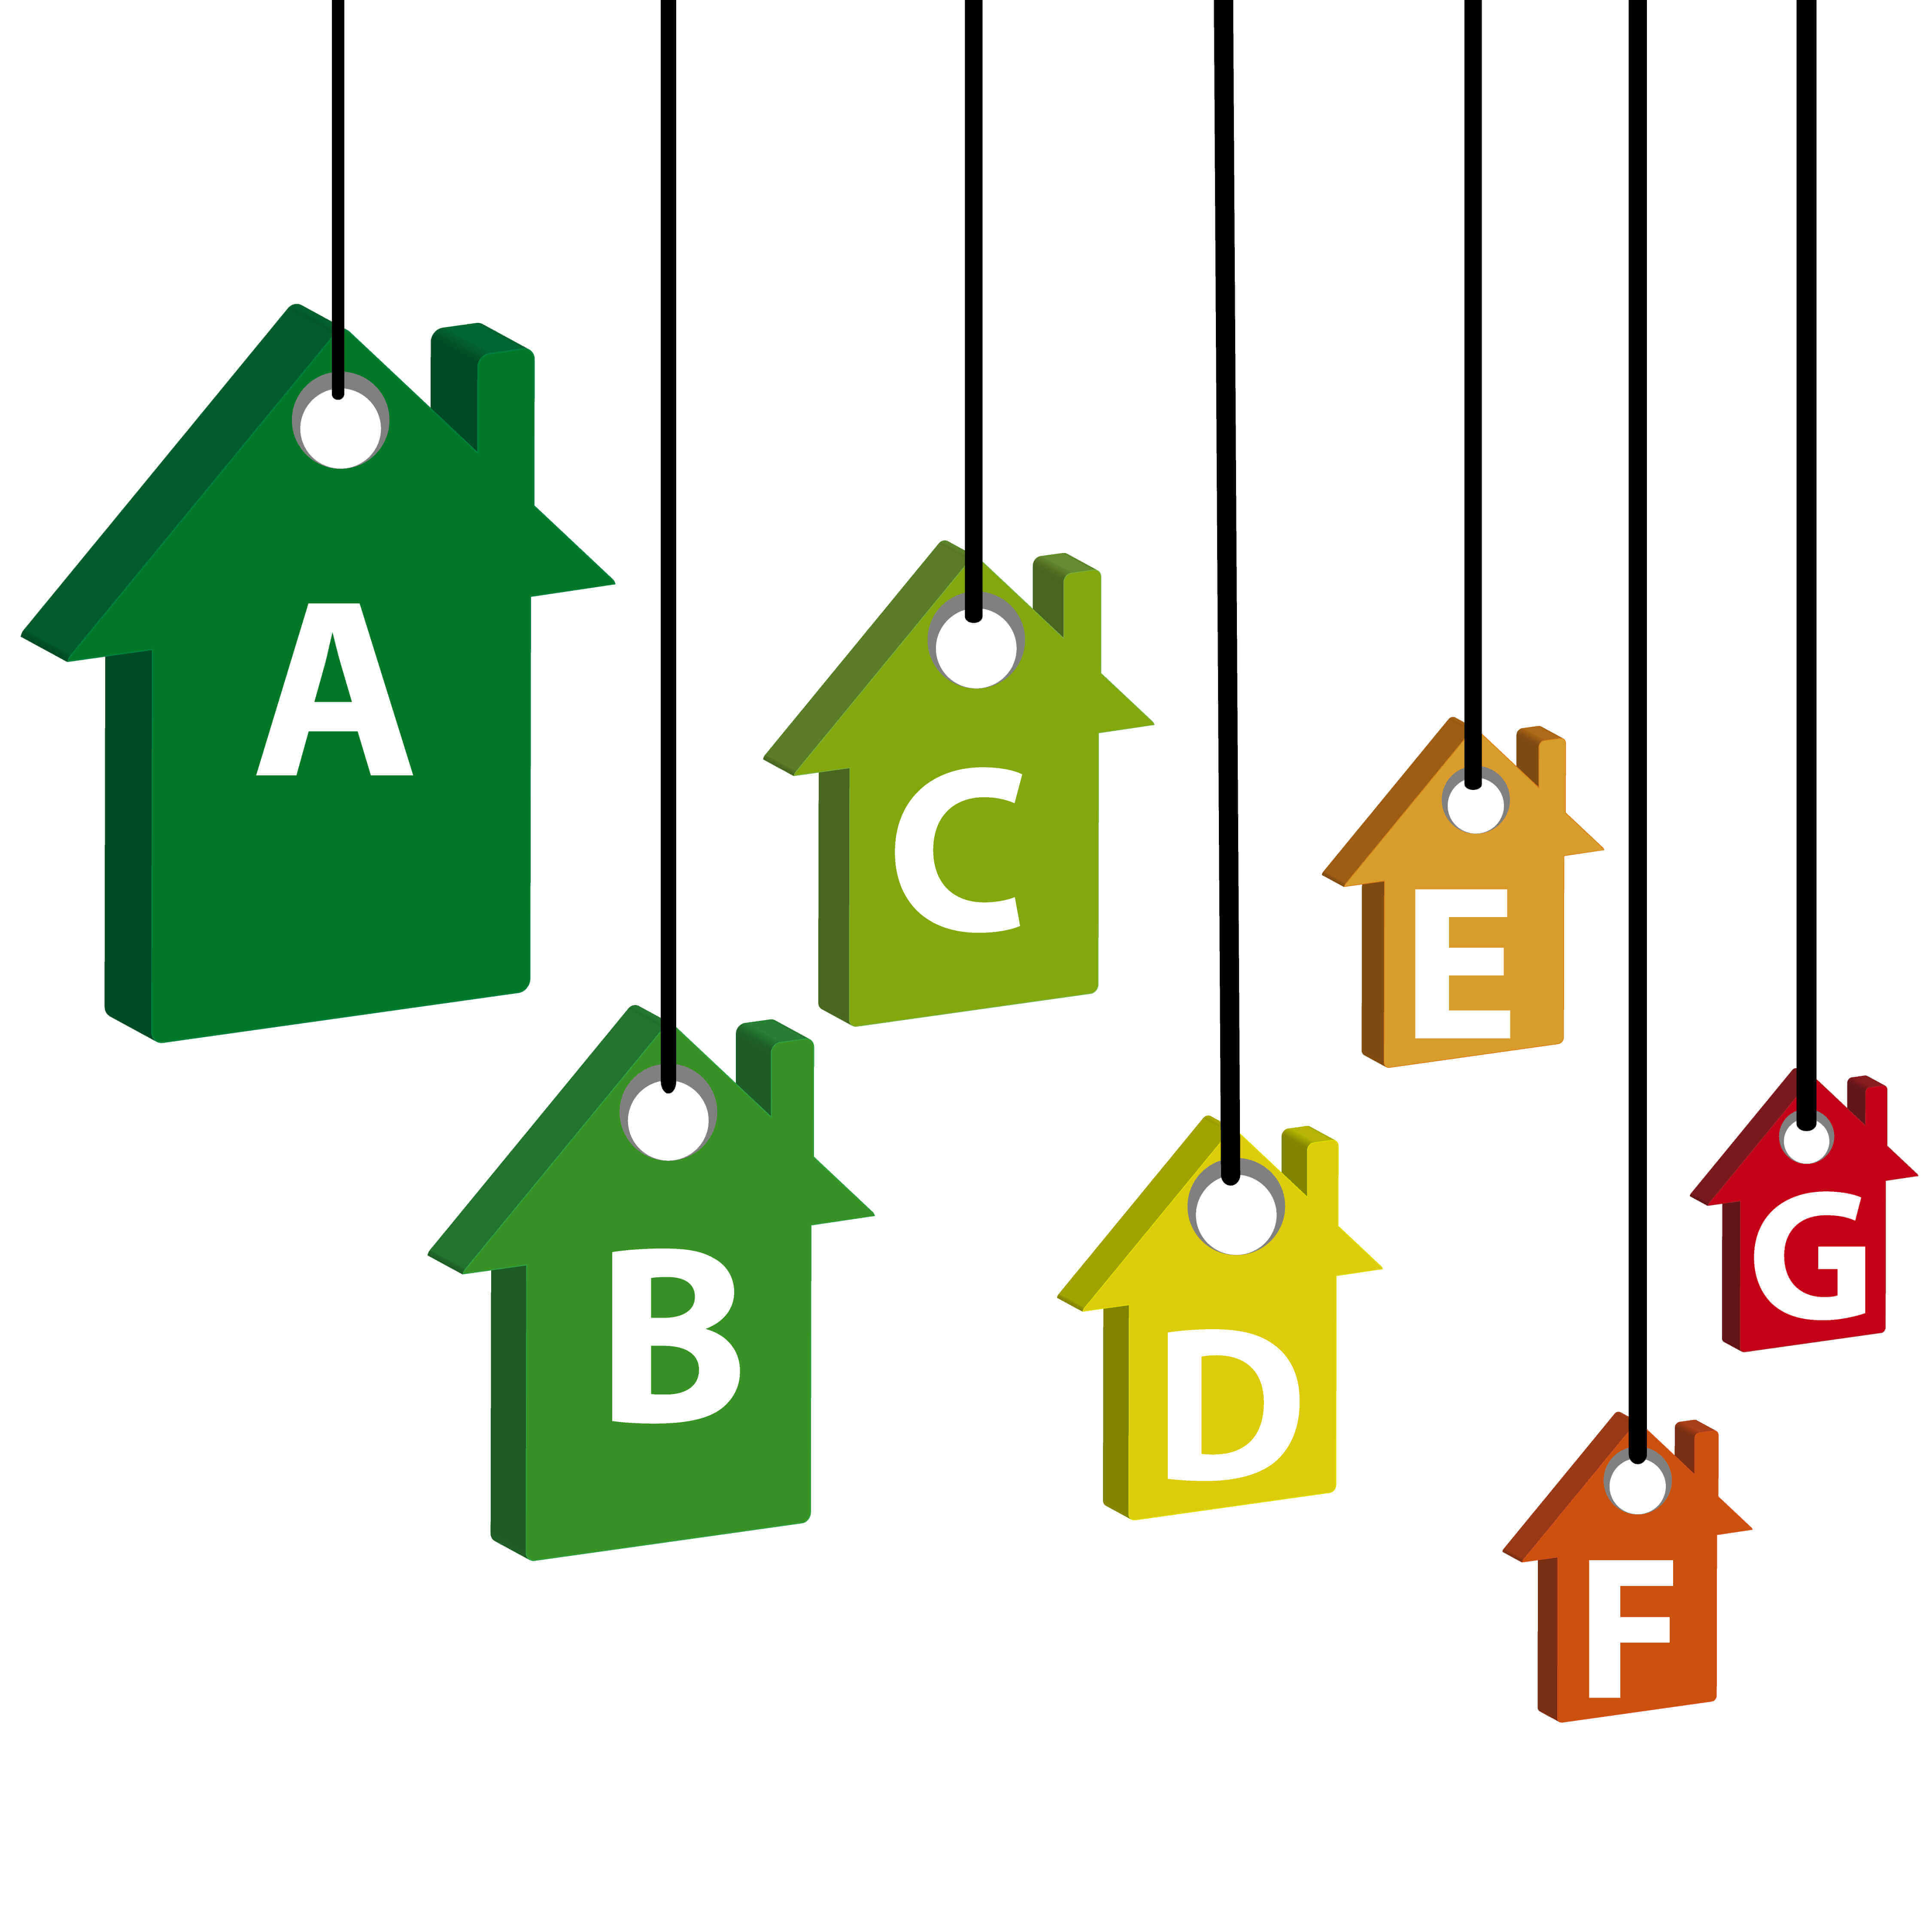 Landlords and agents must check their rental properties’ EPC Ratings